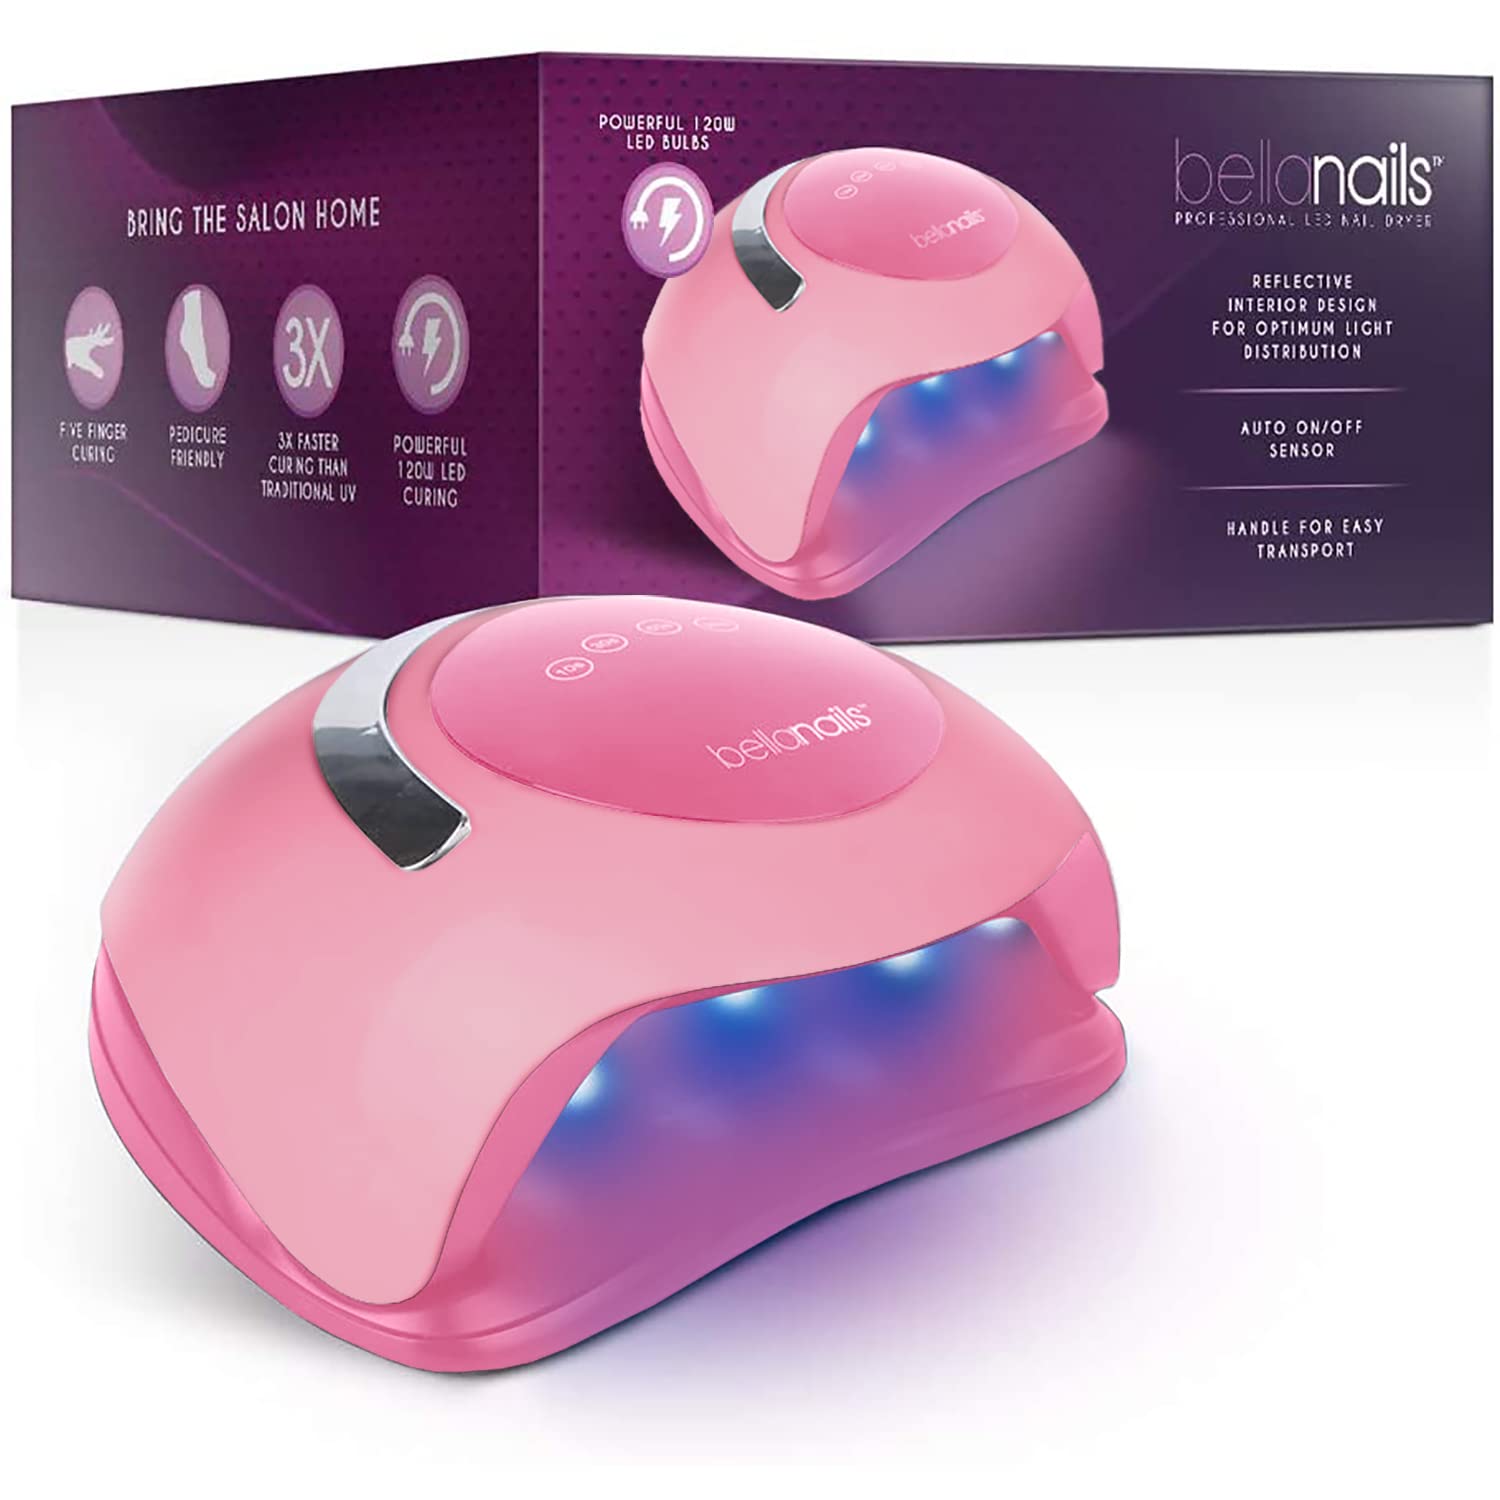 BELLANAILS Professional LED Nail Lamp for Home or Salon Use, 3X Faster Than Traditional UV Nail Dryers, 4 Time Presets, 120 W (Pink)